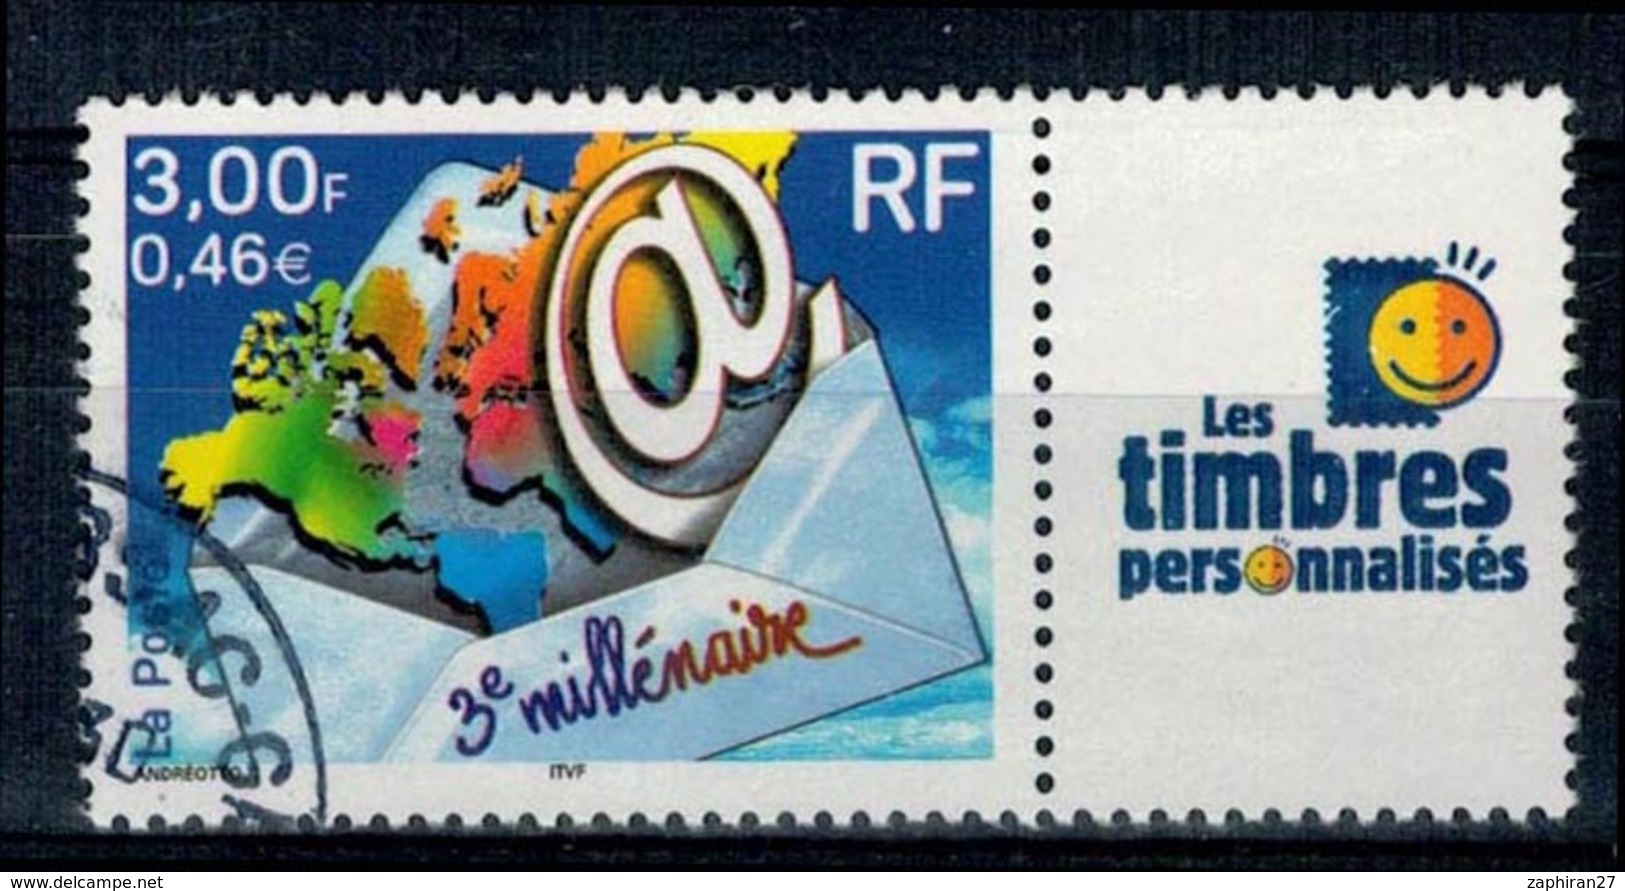 2000 N 3365A 3E MILLENAIRE VIGNETTE TIMBRE PERSO OBLITERE CACHET ROND #229# - Used Stamps